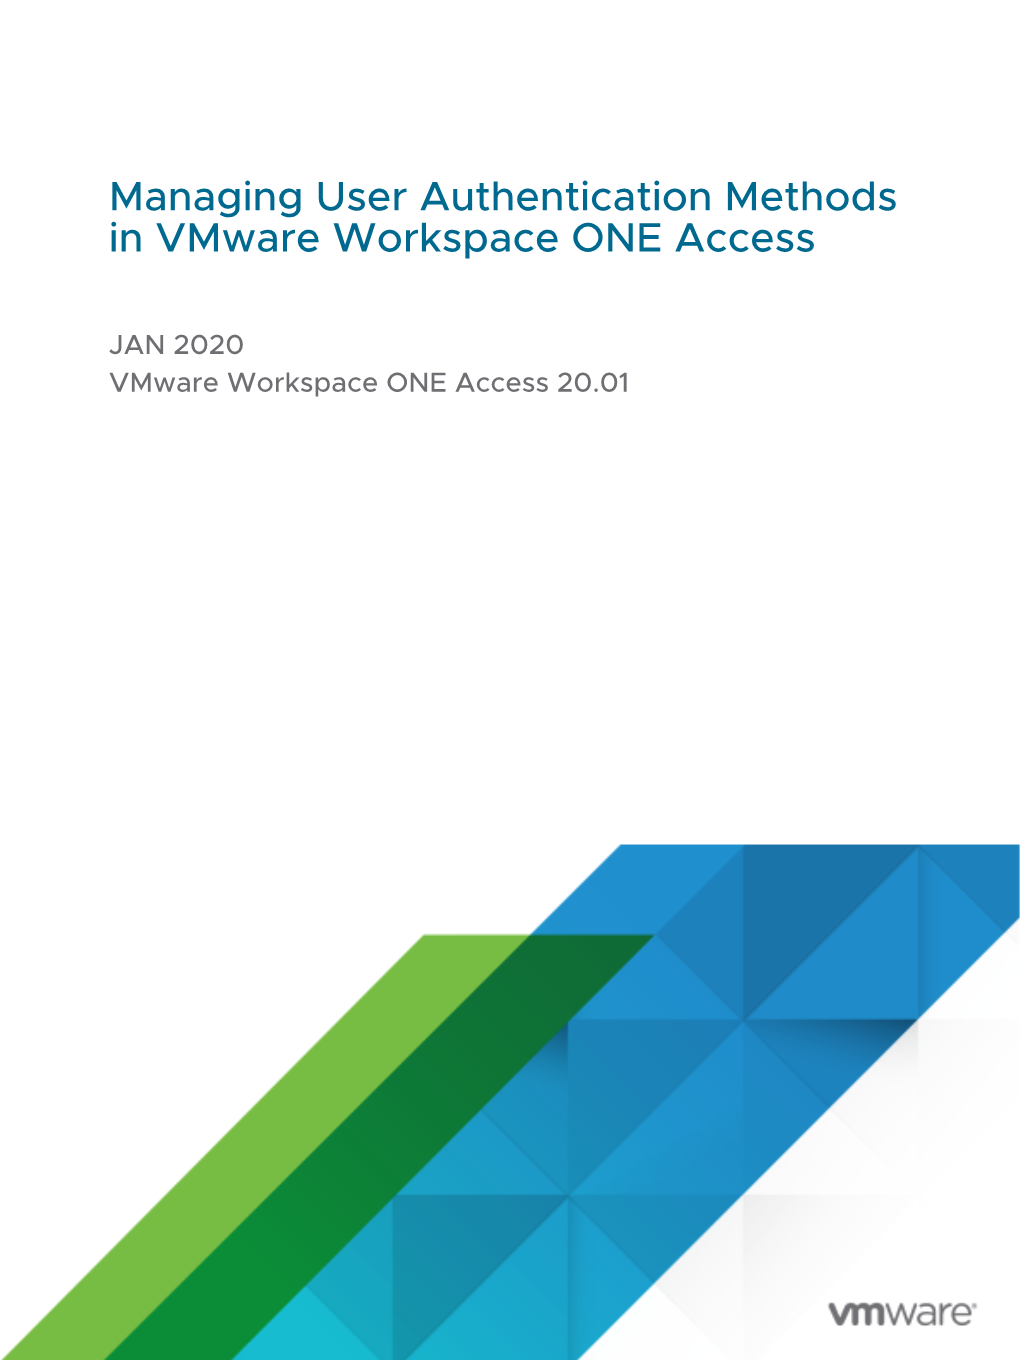 Vmware Workspace ONE Access 20.01 Managing User Authentication Methods in Vmware Workspace ONE Access